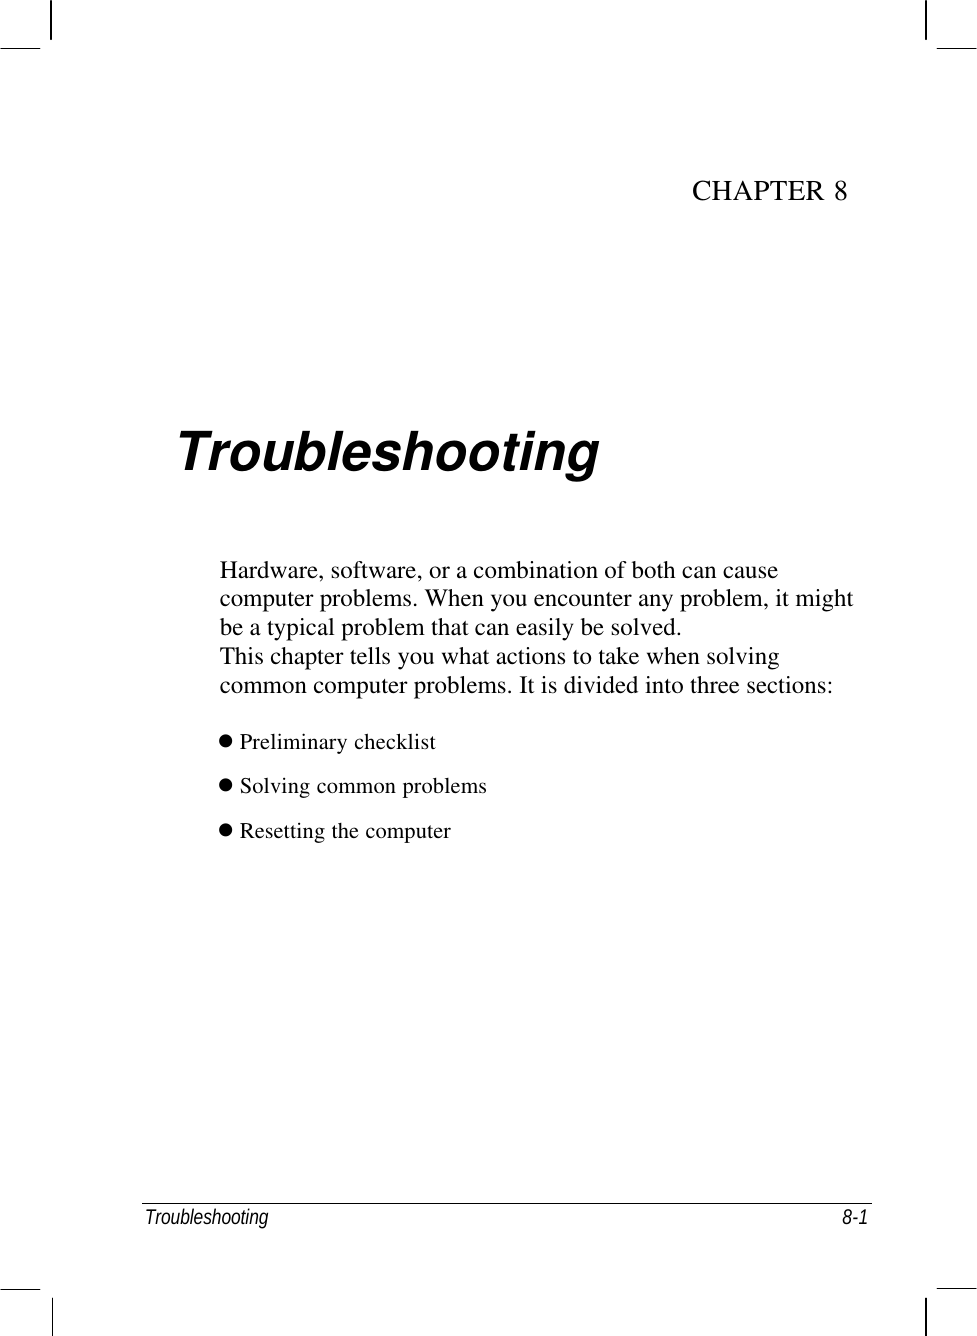  Troubleshooting    8-1 CHAPTER 8  Troubleshooting Hardware, software, or a combination of both can cause computer problems. When you encounter any problem, it might be a typical problem that can easily be solved. This chapter tells you what actions to take when solving common computer problems. It is divided into three sections: l Preliminary checklist l Solving common problems l Resetting the computer 